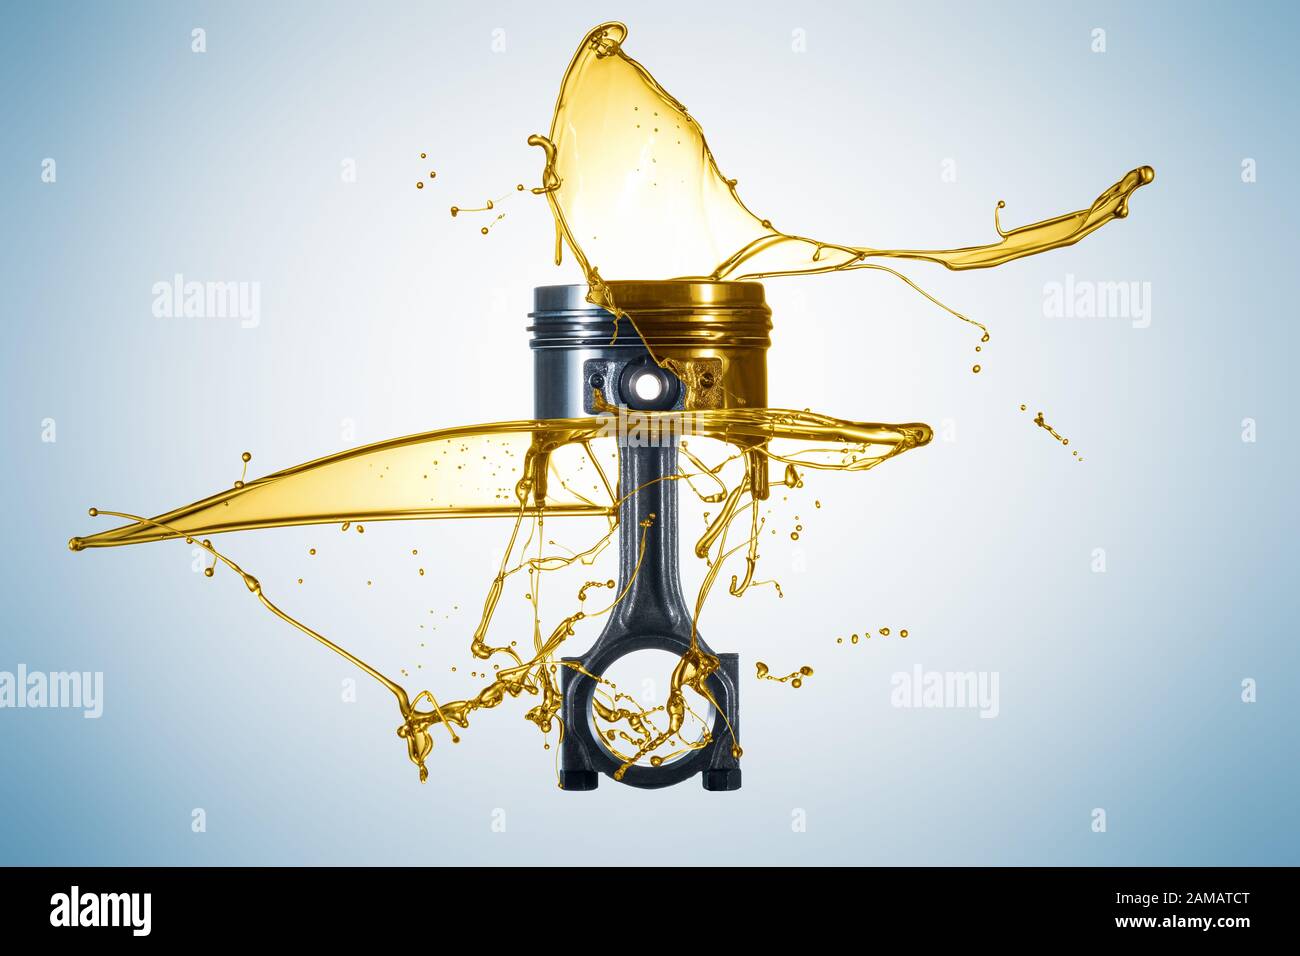 Piston and connecting rod are thrown with oil. Engine oil concept - Oil Splash Stock Photo